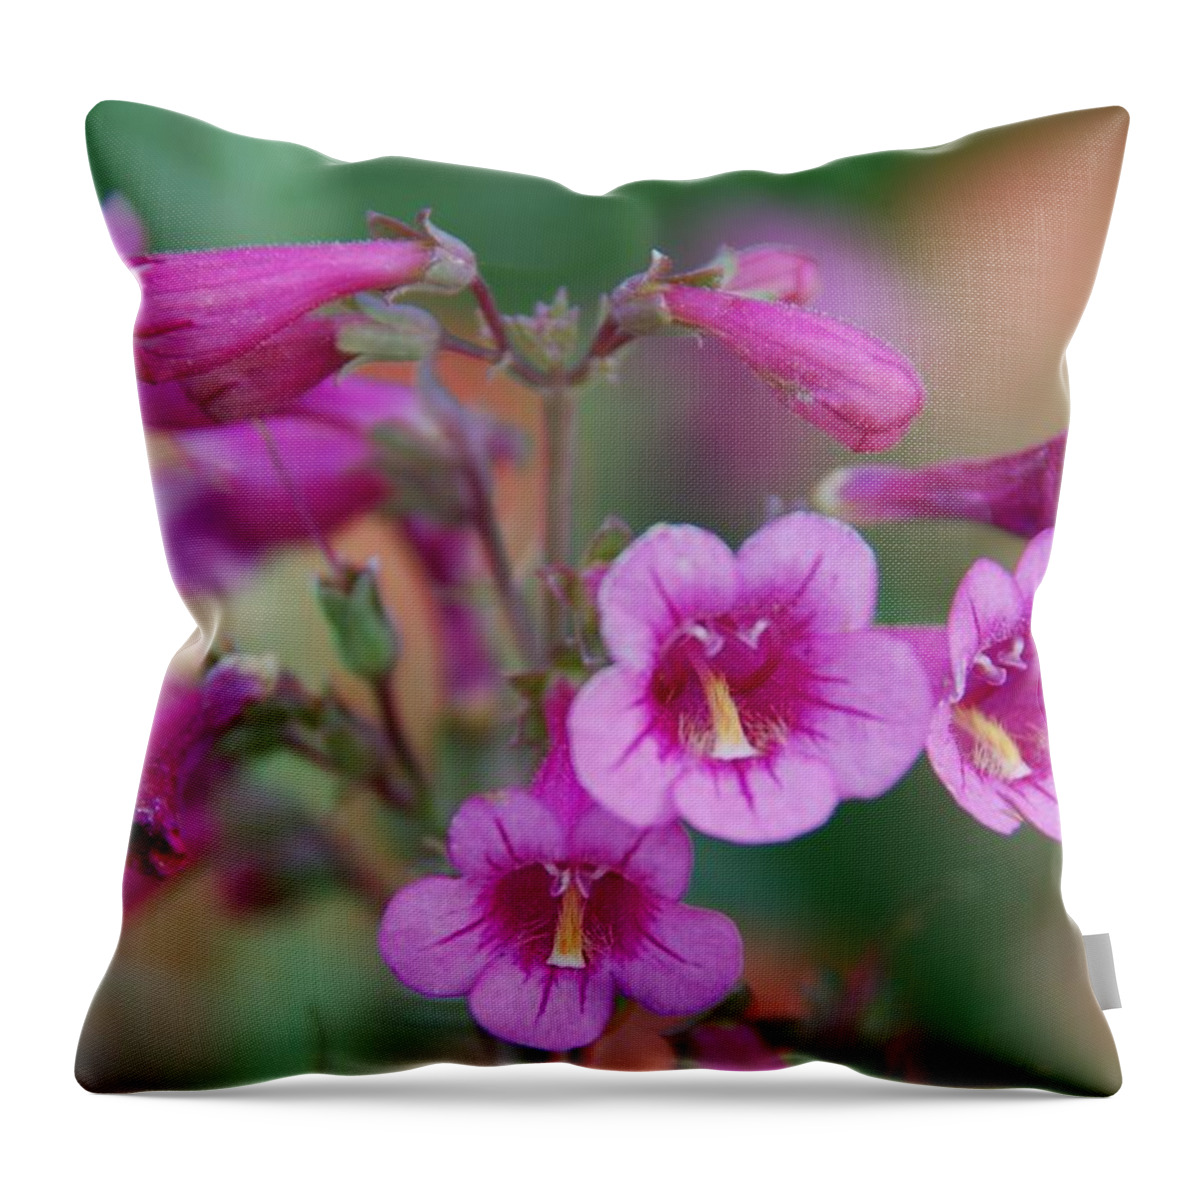 Flowers Throw Pillow featuring the photograph Pink Flowers by Tam Ryan